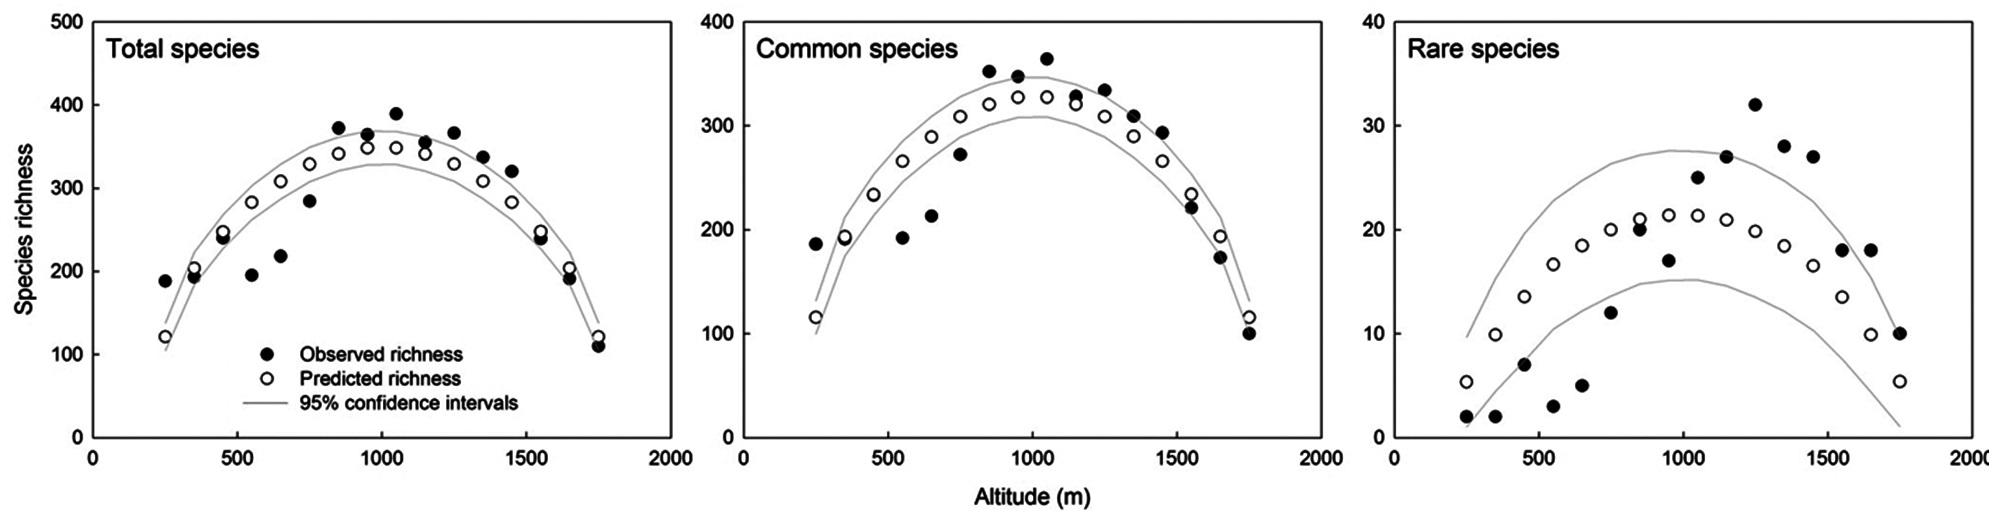 Observed and predicted species richness and 95% confidence intervals for the predicted mid-domain effect richness as a function of altitude for
total, common, and rare plant species along the ridge of the Baekdudaegan Mountains, South Korea.